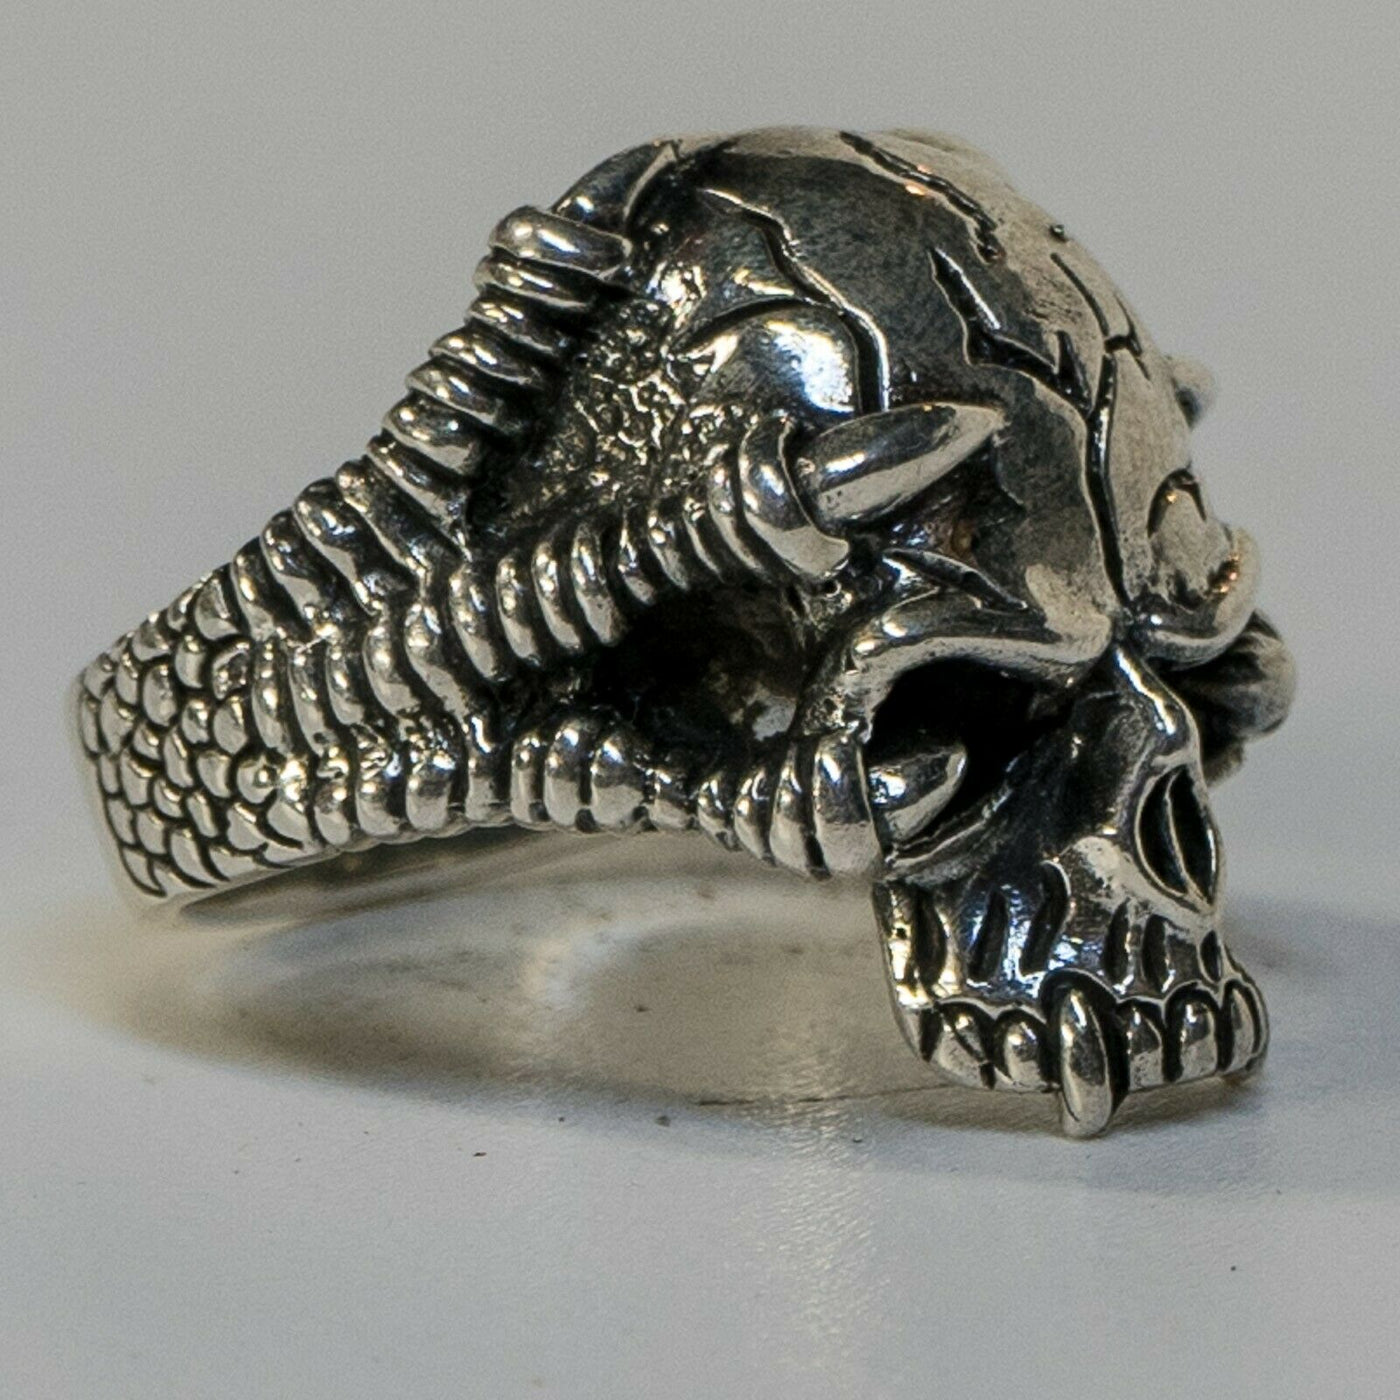 Dragon Claw Skull Ring 925 solid silver Polished Metal Biker Gothic Sizes M-Z